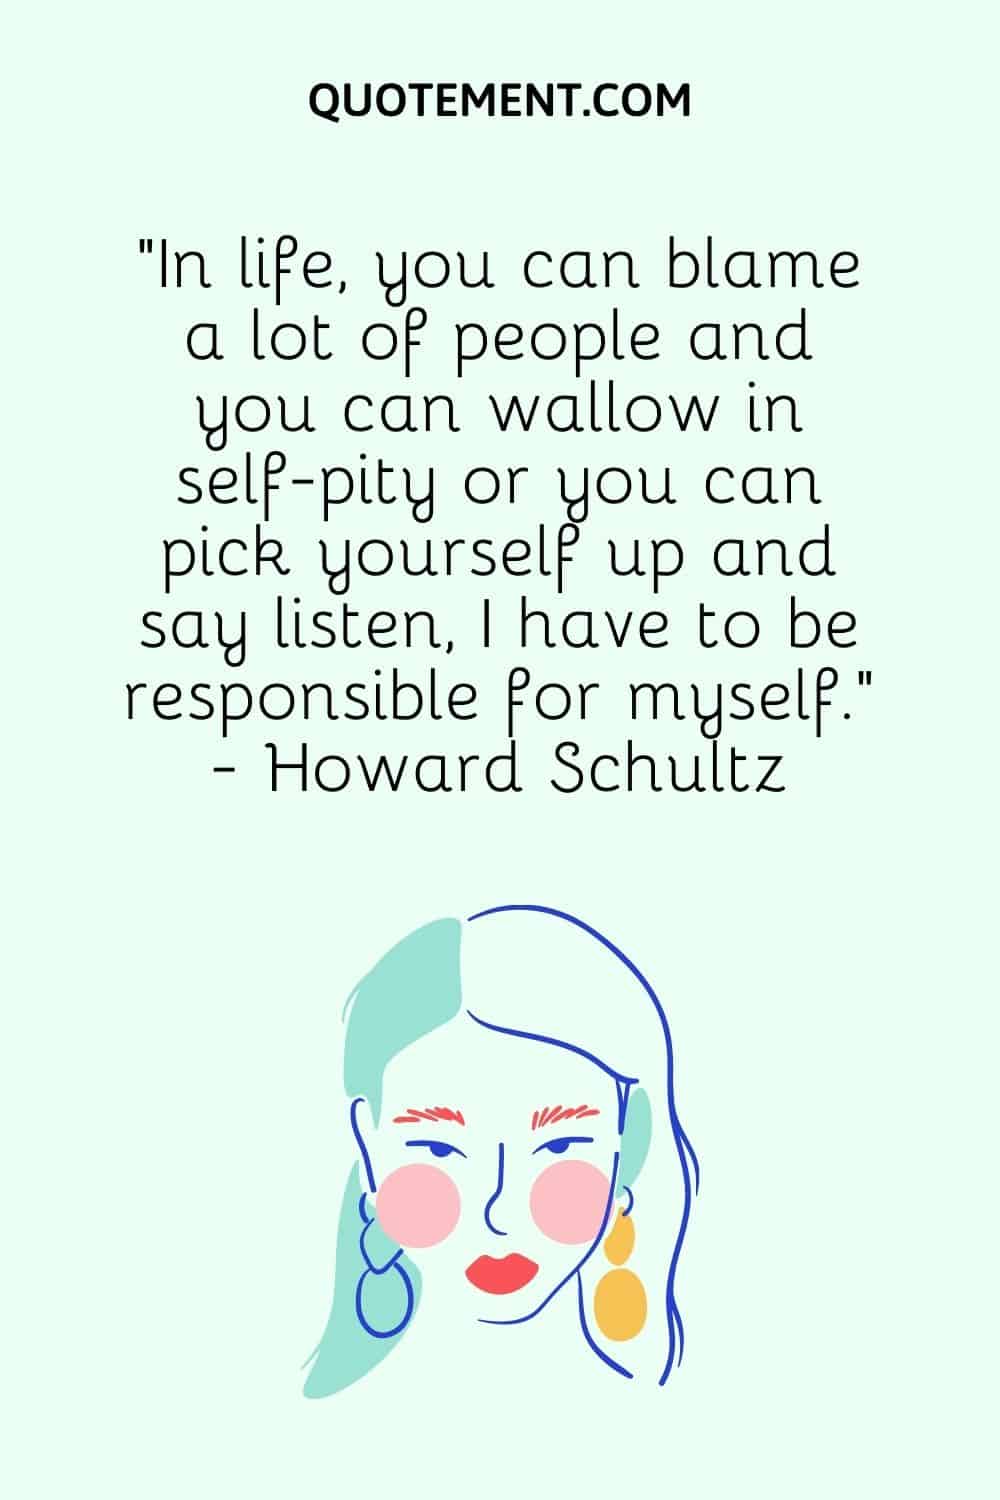 “In life, you can blame a lot of people and you can wallow in self-pity or you can pick yourself up and say listen, I have to be responsible for myself.” - Howard Schultz